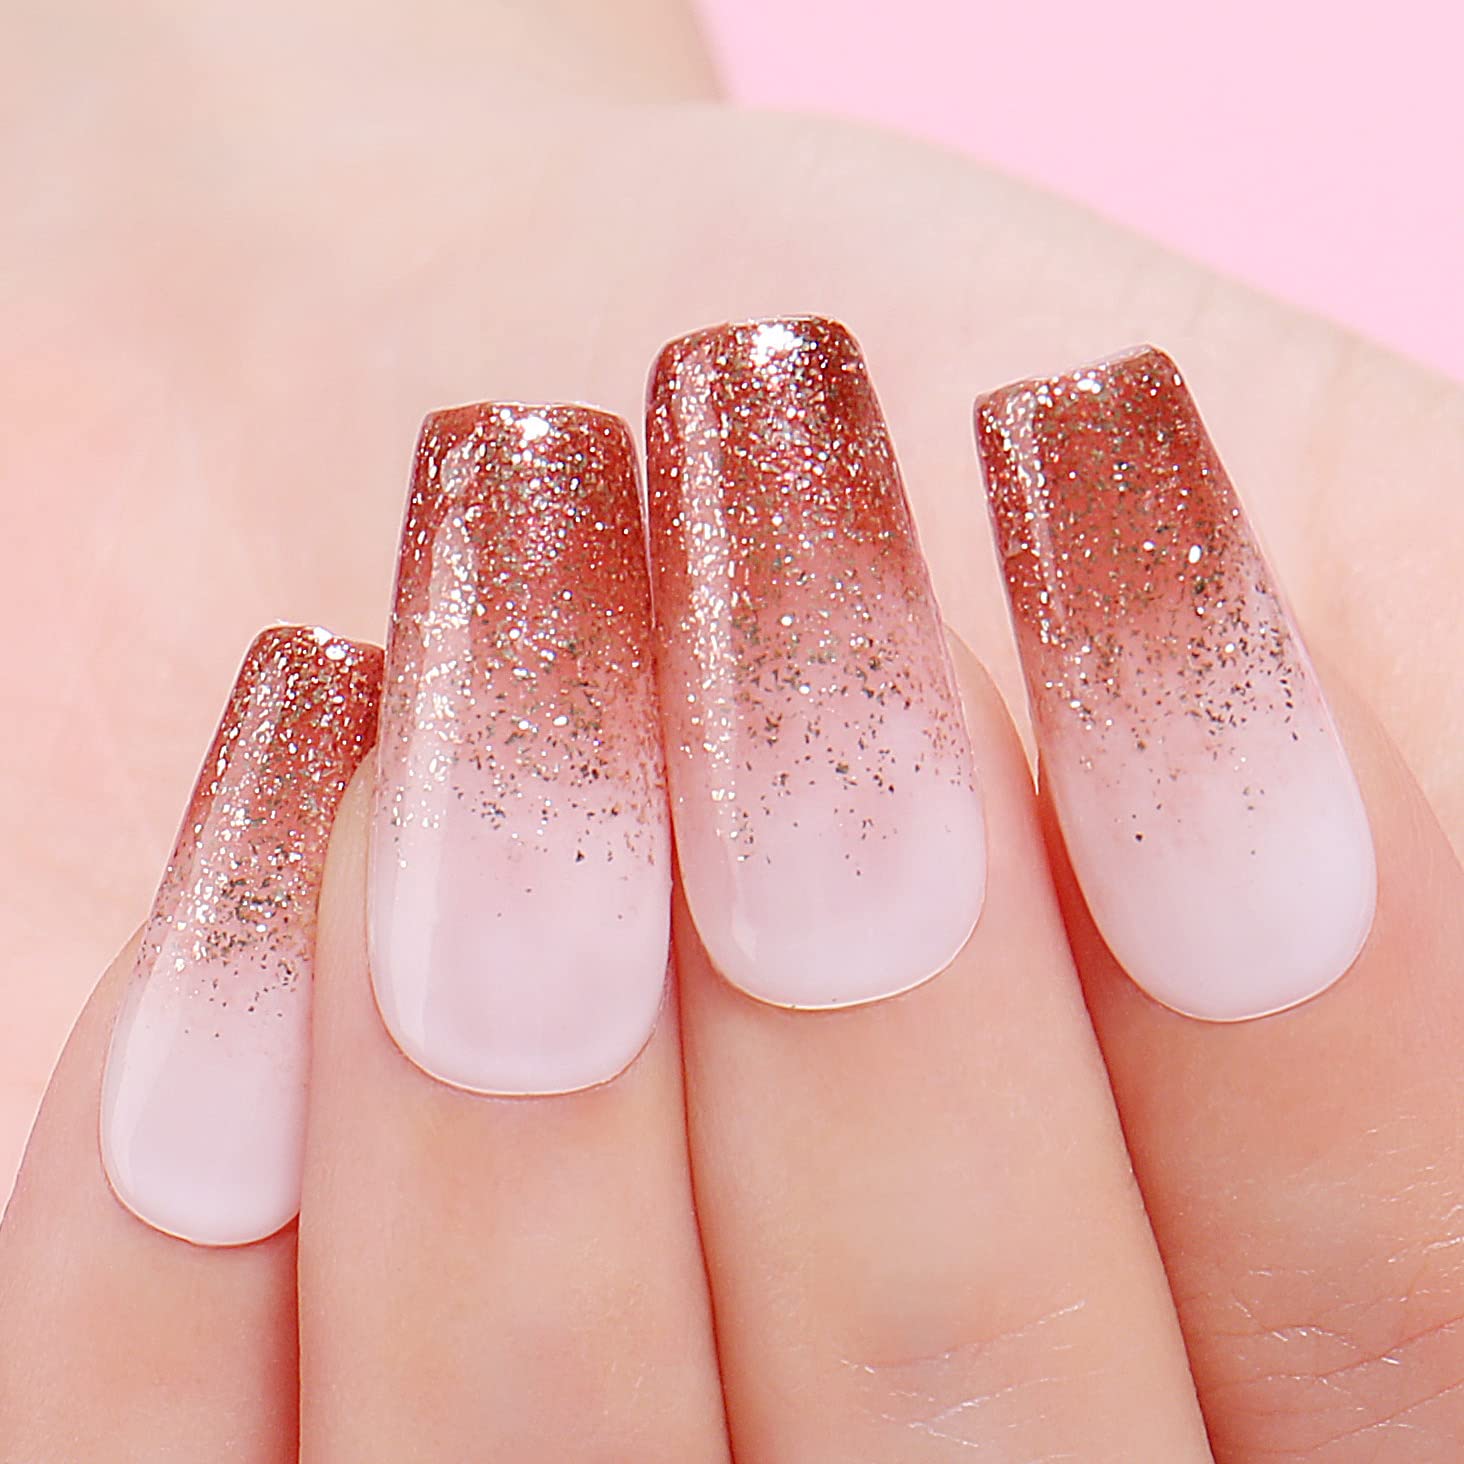 Buy Champagne Rose Gold Nail Polish Glitter Shimmer Chrome Nail Polish  Bronze Gold and Pink Metallic Glitter Nail Polish Vegan Nail Polish Online  in India - Etsy